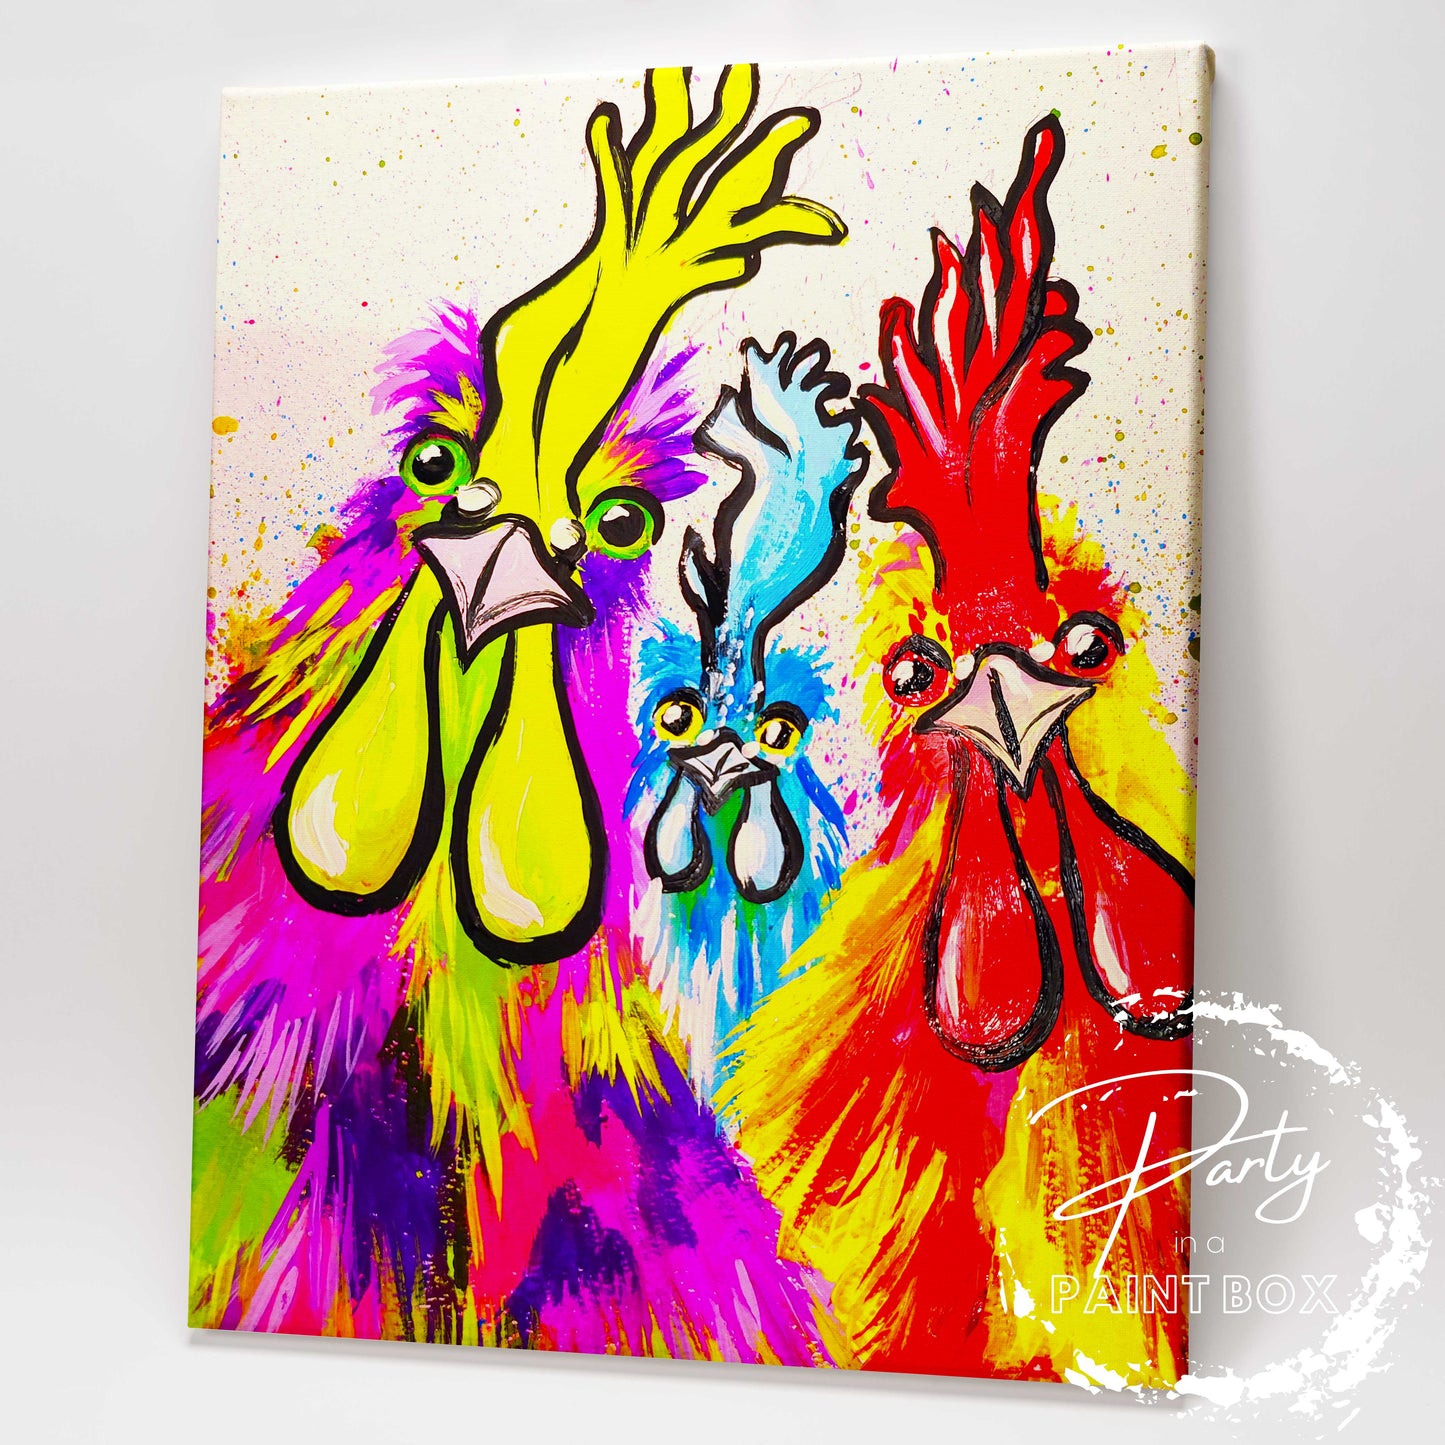 'What the Cluck' Painting Pack